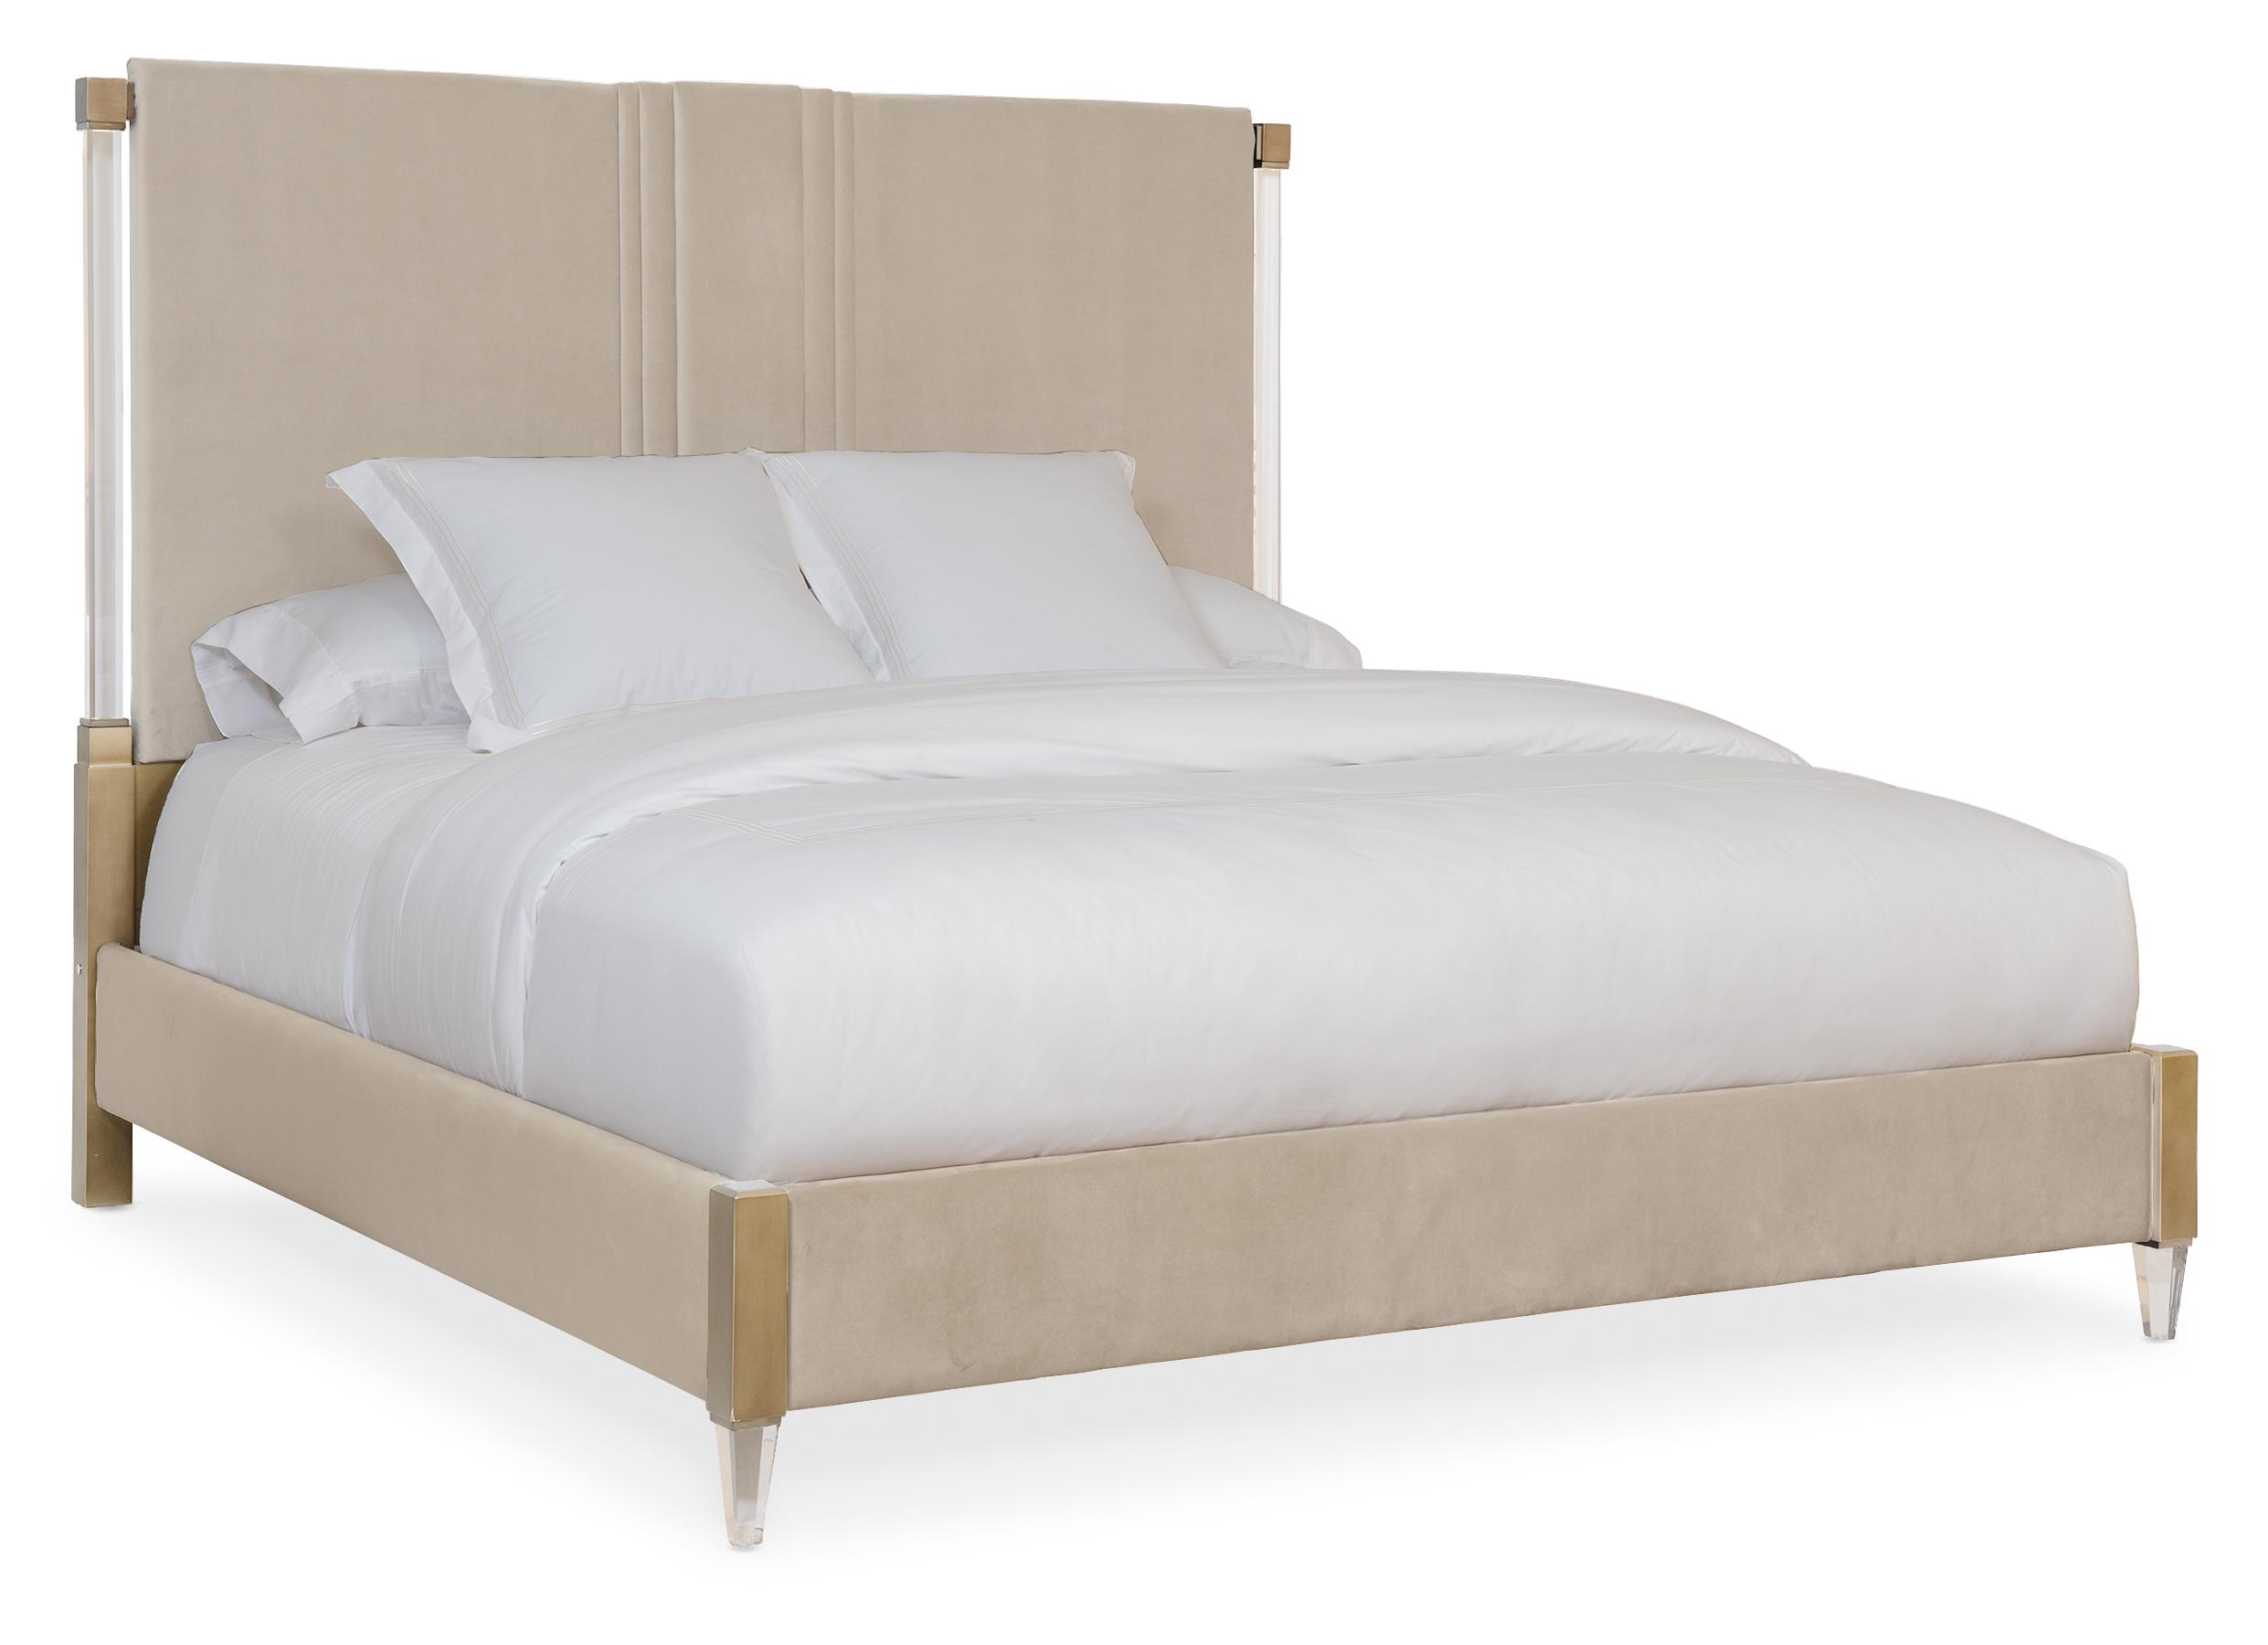 Contemporary Platform Bed Light Up Your Life CLA-019-122 in Beige Microfiber